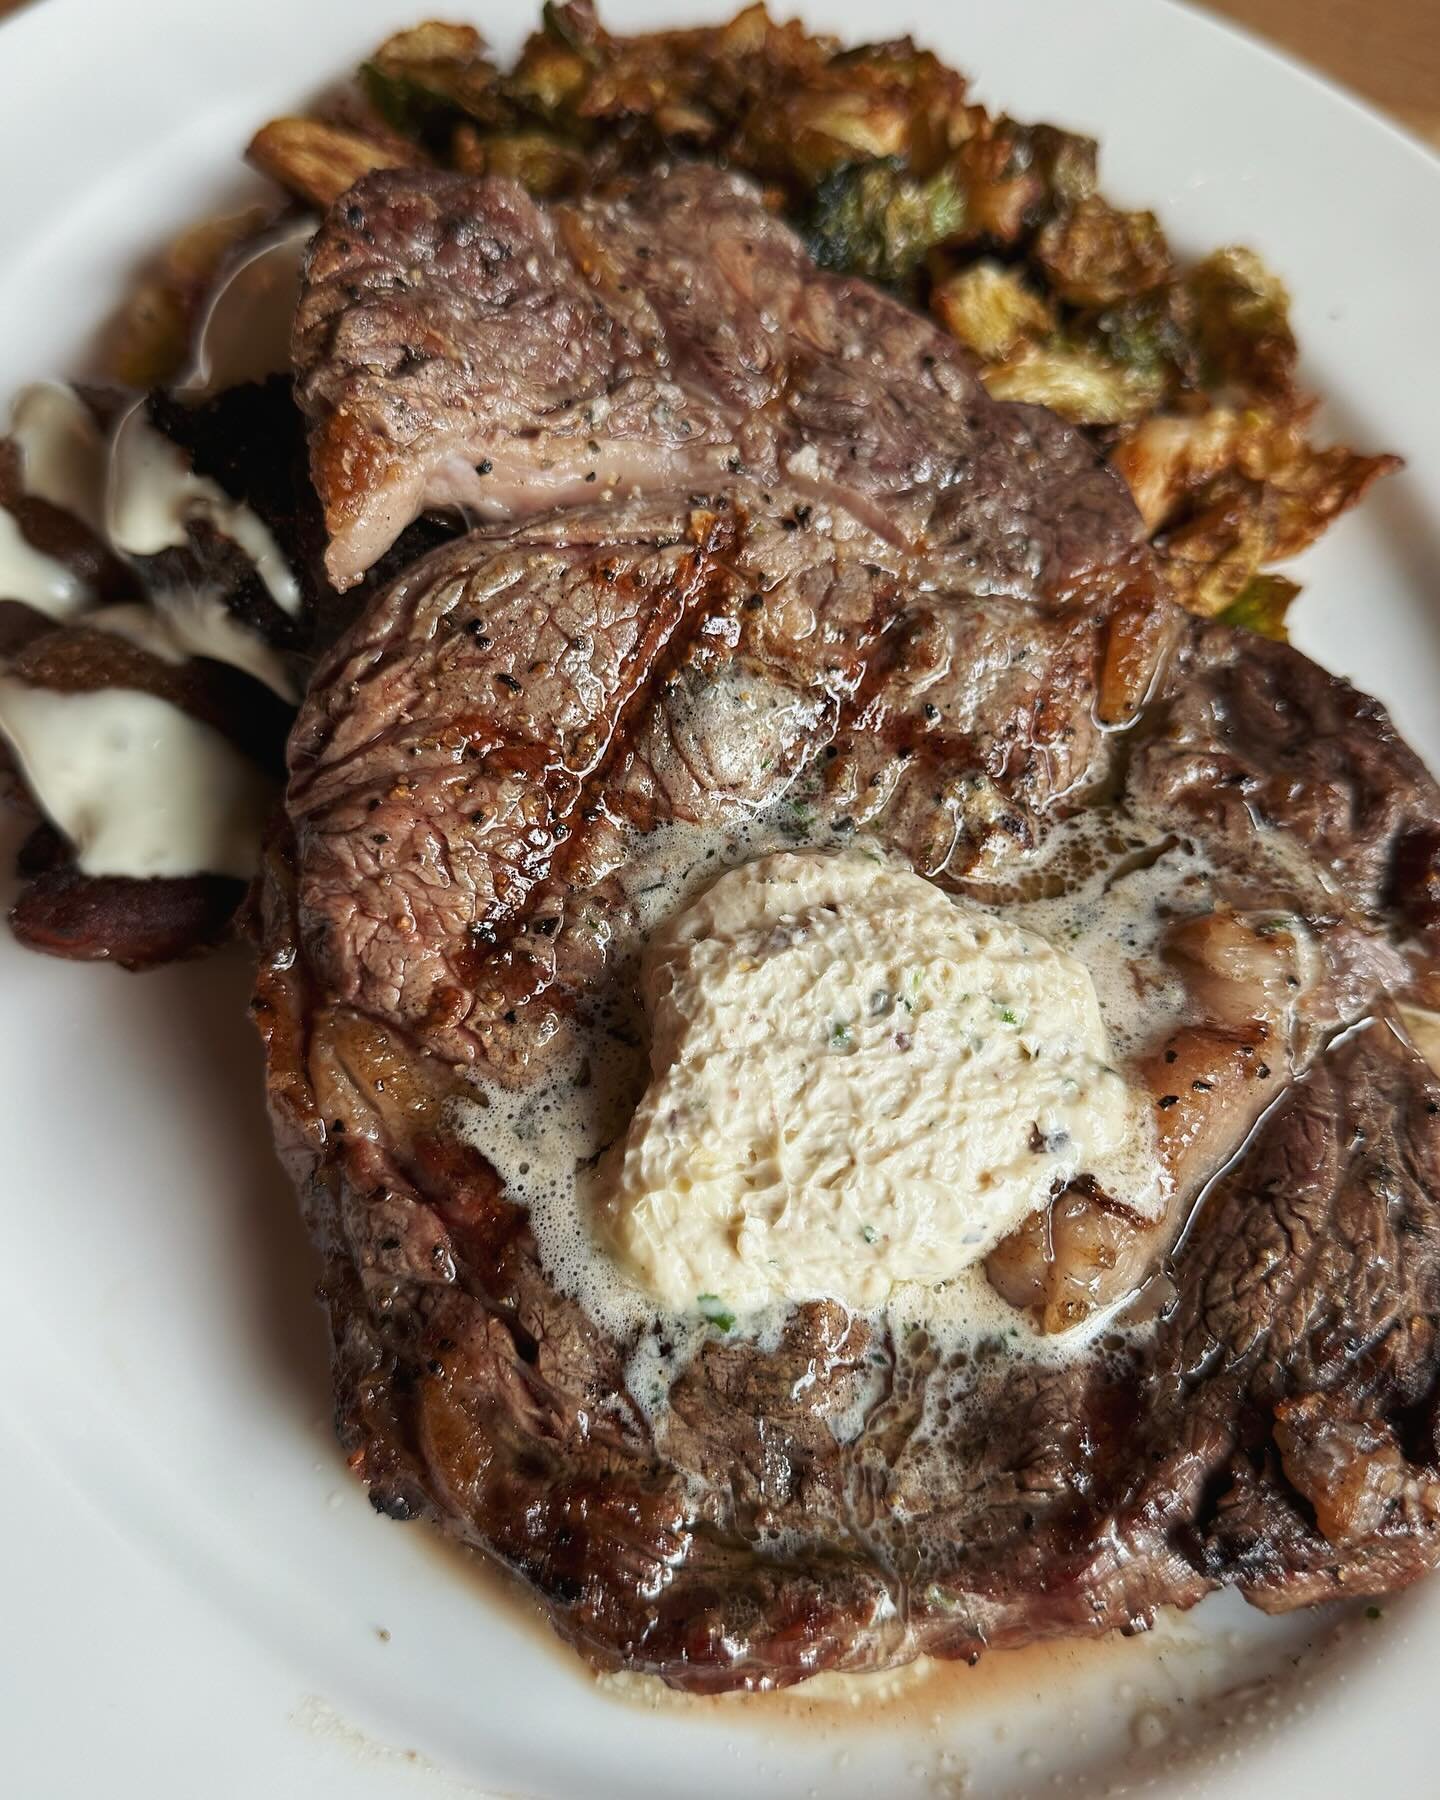 We&rsquo;re serious about our ribeye. 12 oz perfectly marbled Country Natural ribeye, Chef&rsquo;s bone marrow butter, &ldquo;ASMR-crispy&rdquo; potatoes with bleu cheese fondue &amp; fried brussels. An instant favorite.